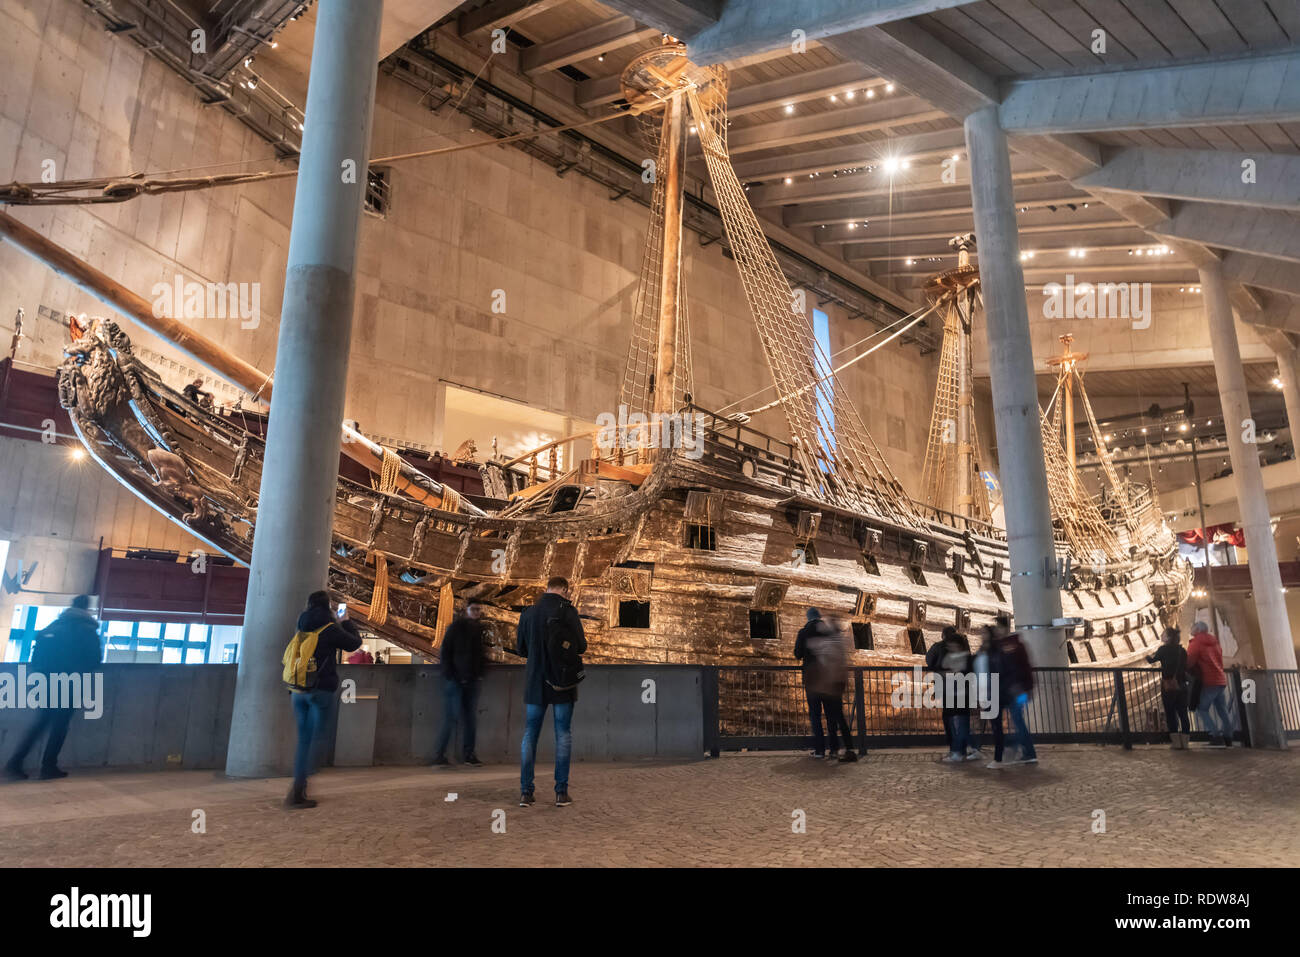 Stockholm, Sweden - November 18, 2018. Interior view of Vasa Museum in Stockholm, with 17th century warship Vasa and people. Stock Photo